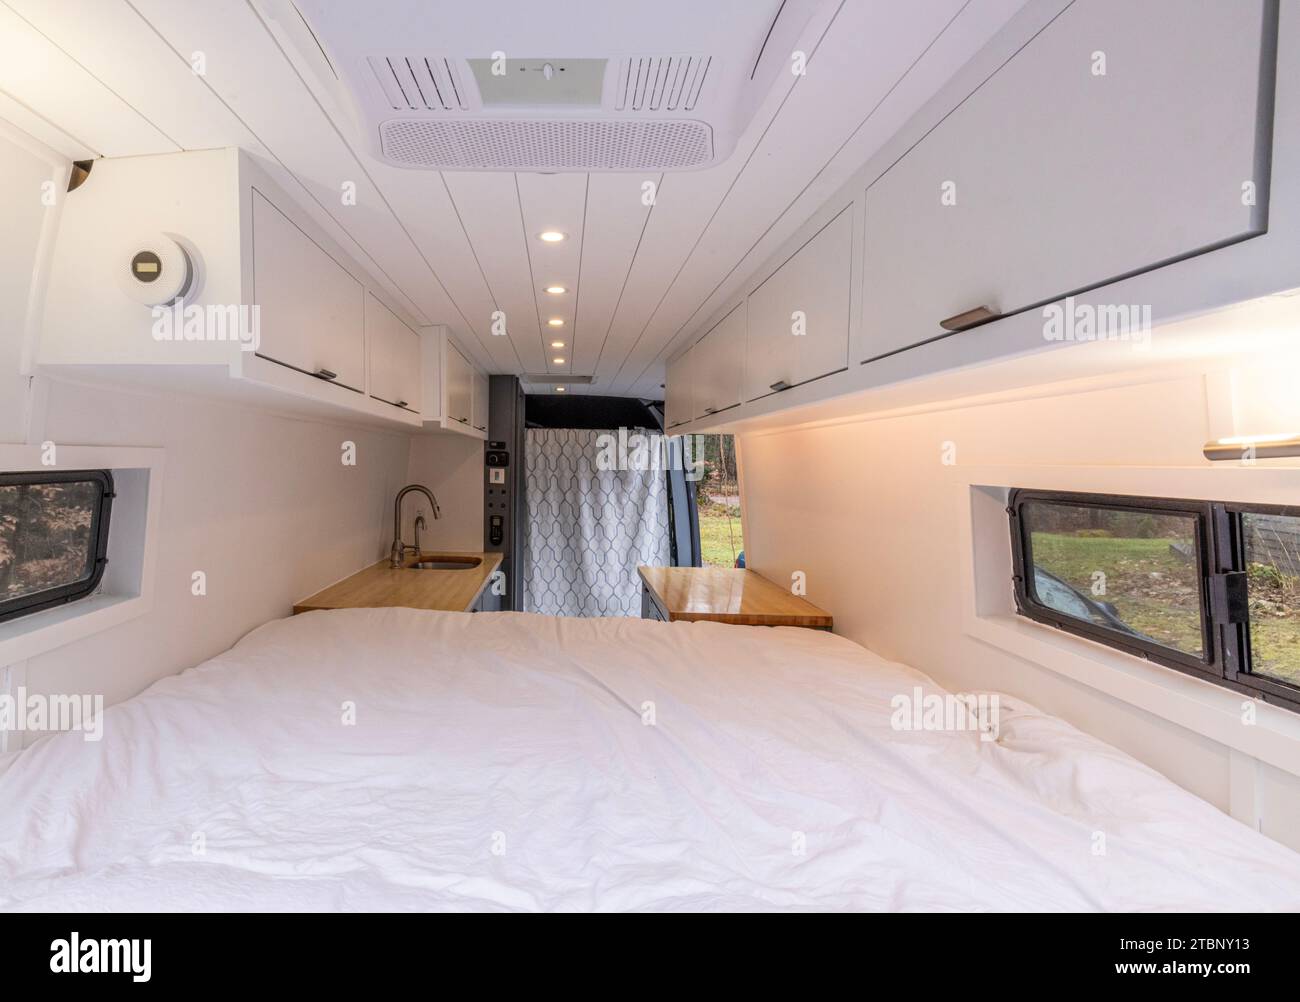 All white camper interior of a converted cargo van Stock Photo